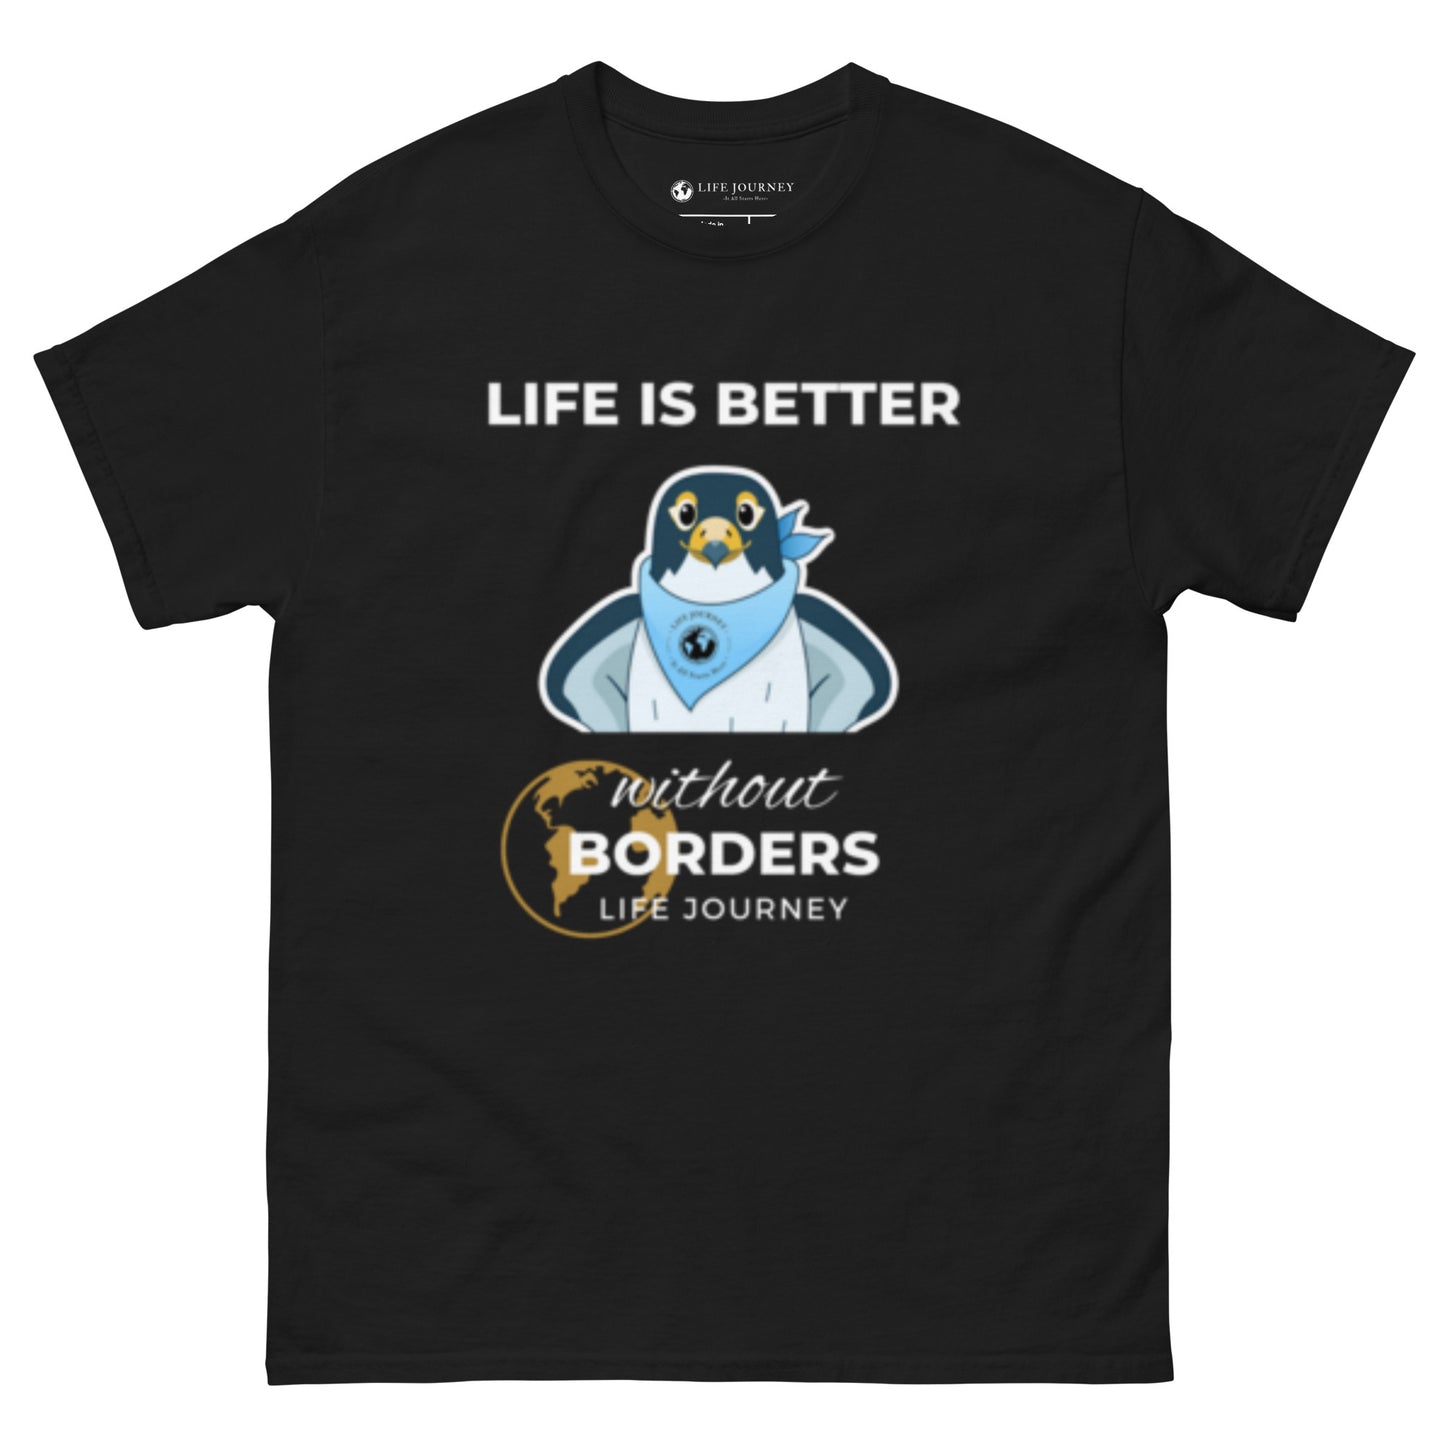 Men's classic tee Life Is Better Without Borders